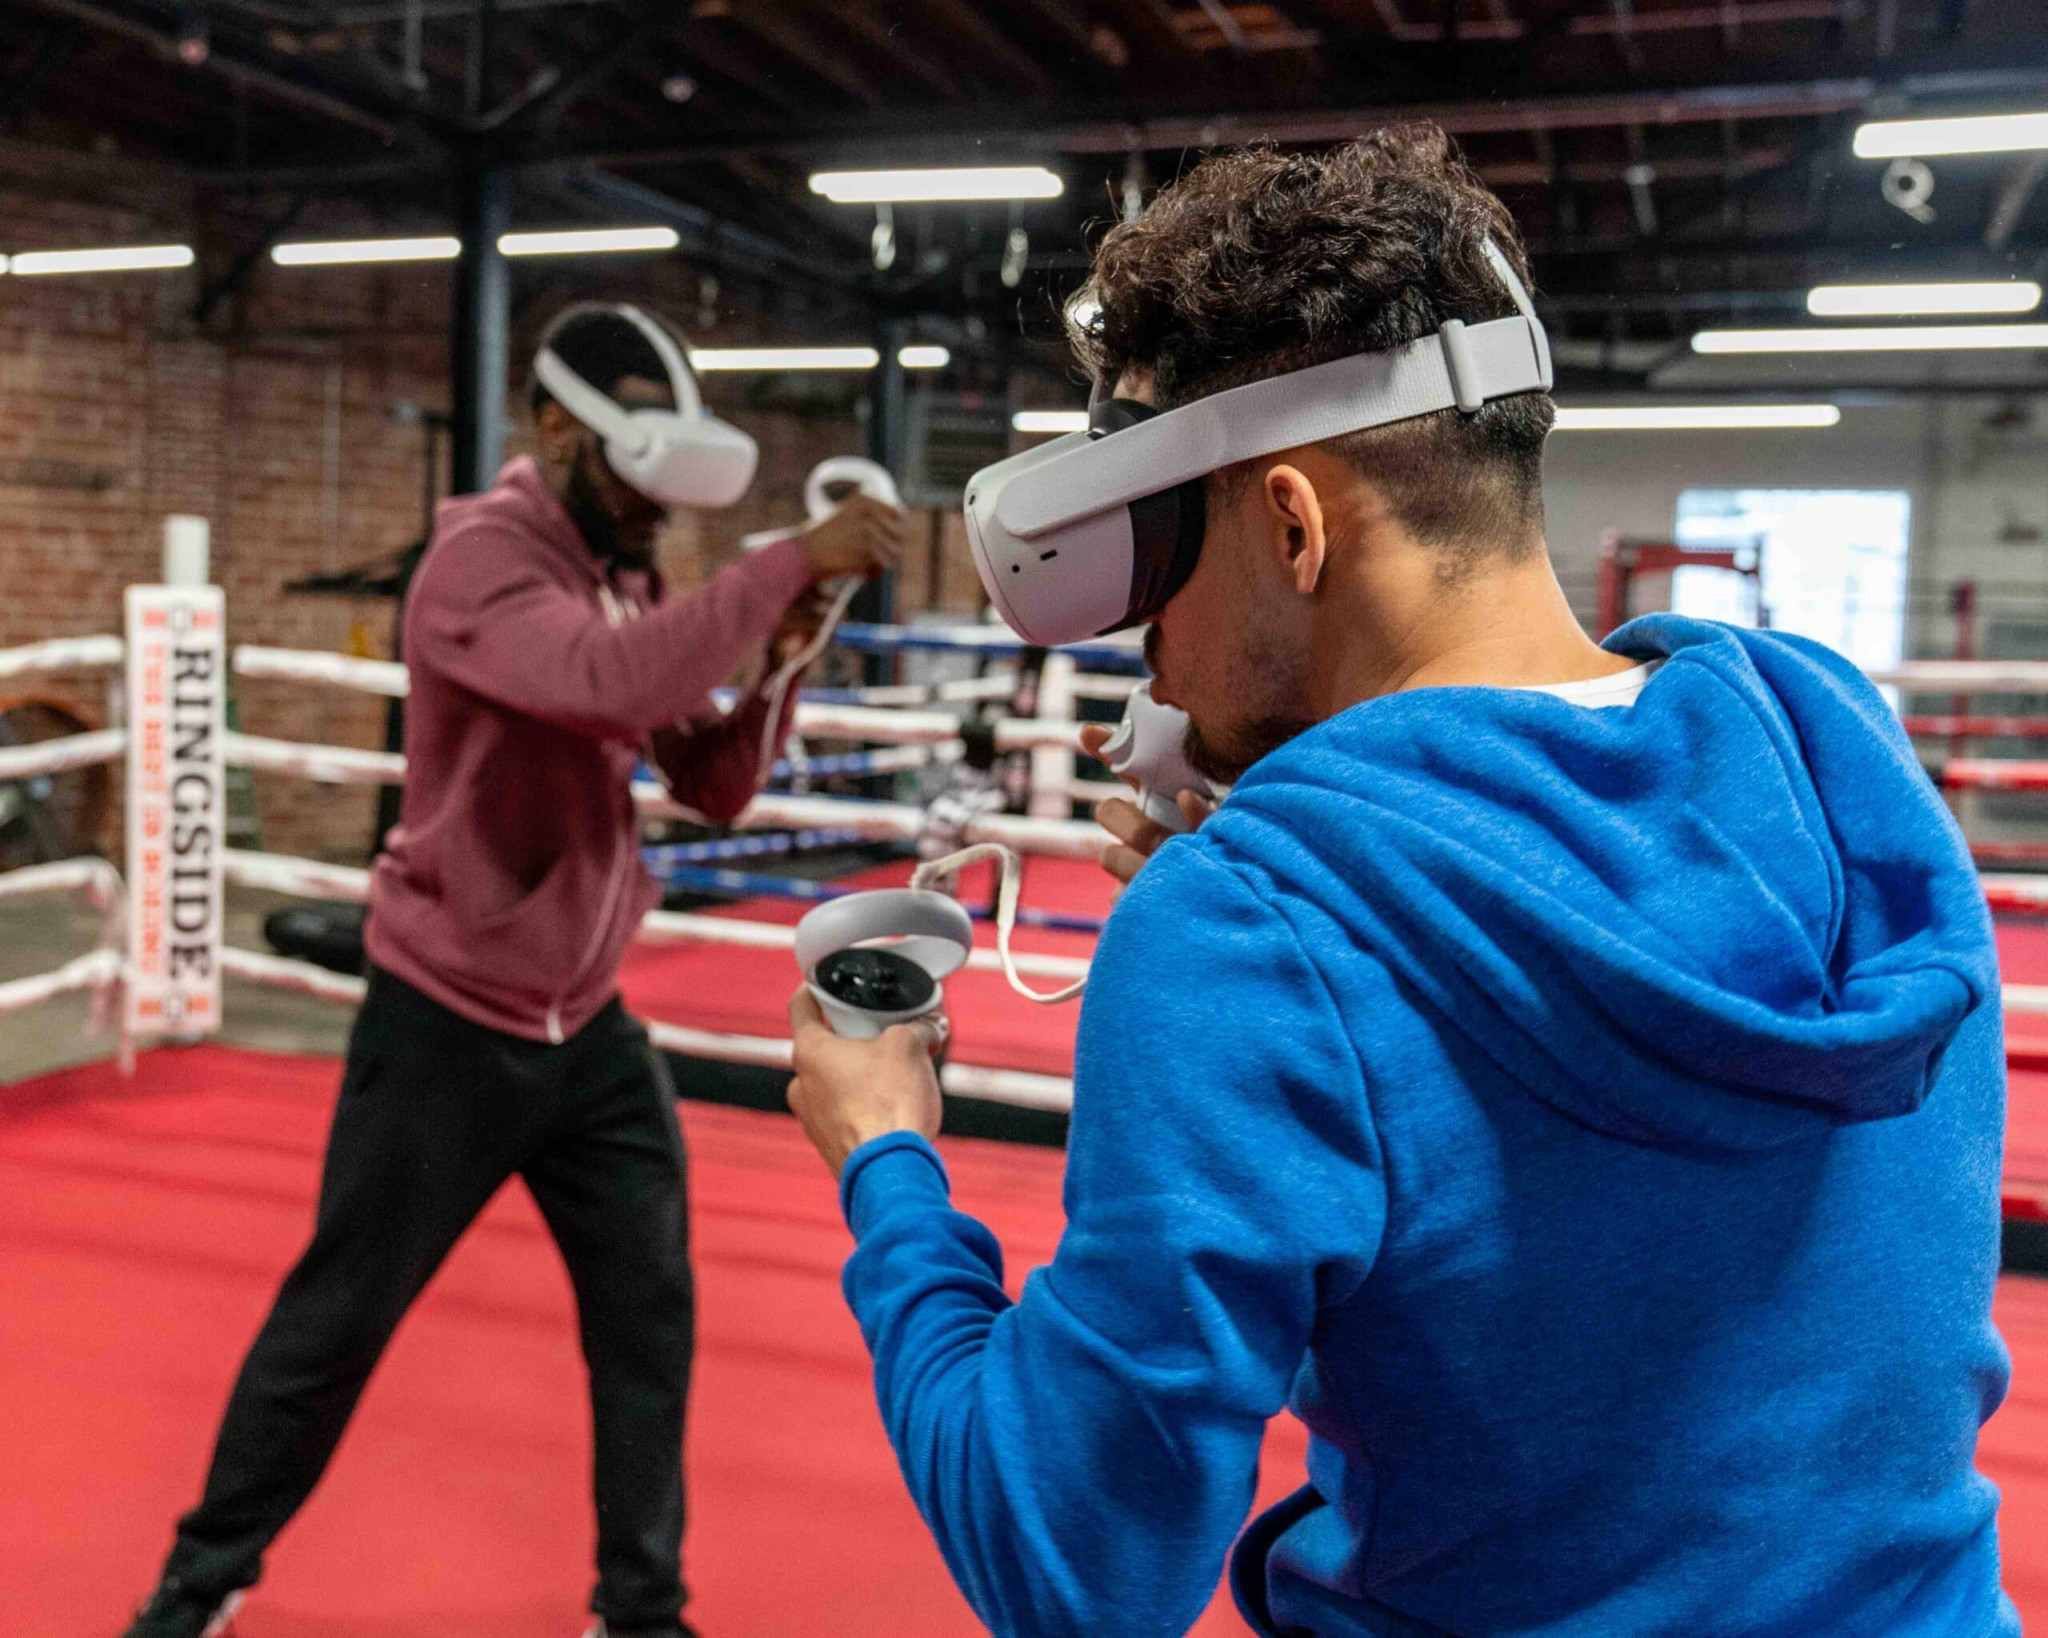 USA Boxing has collaborated with Engine Room to create a new virtual reality boxing game ©USA Boxing